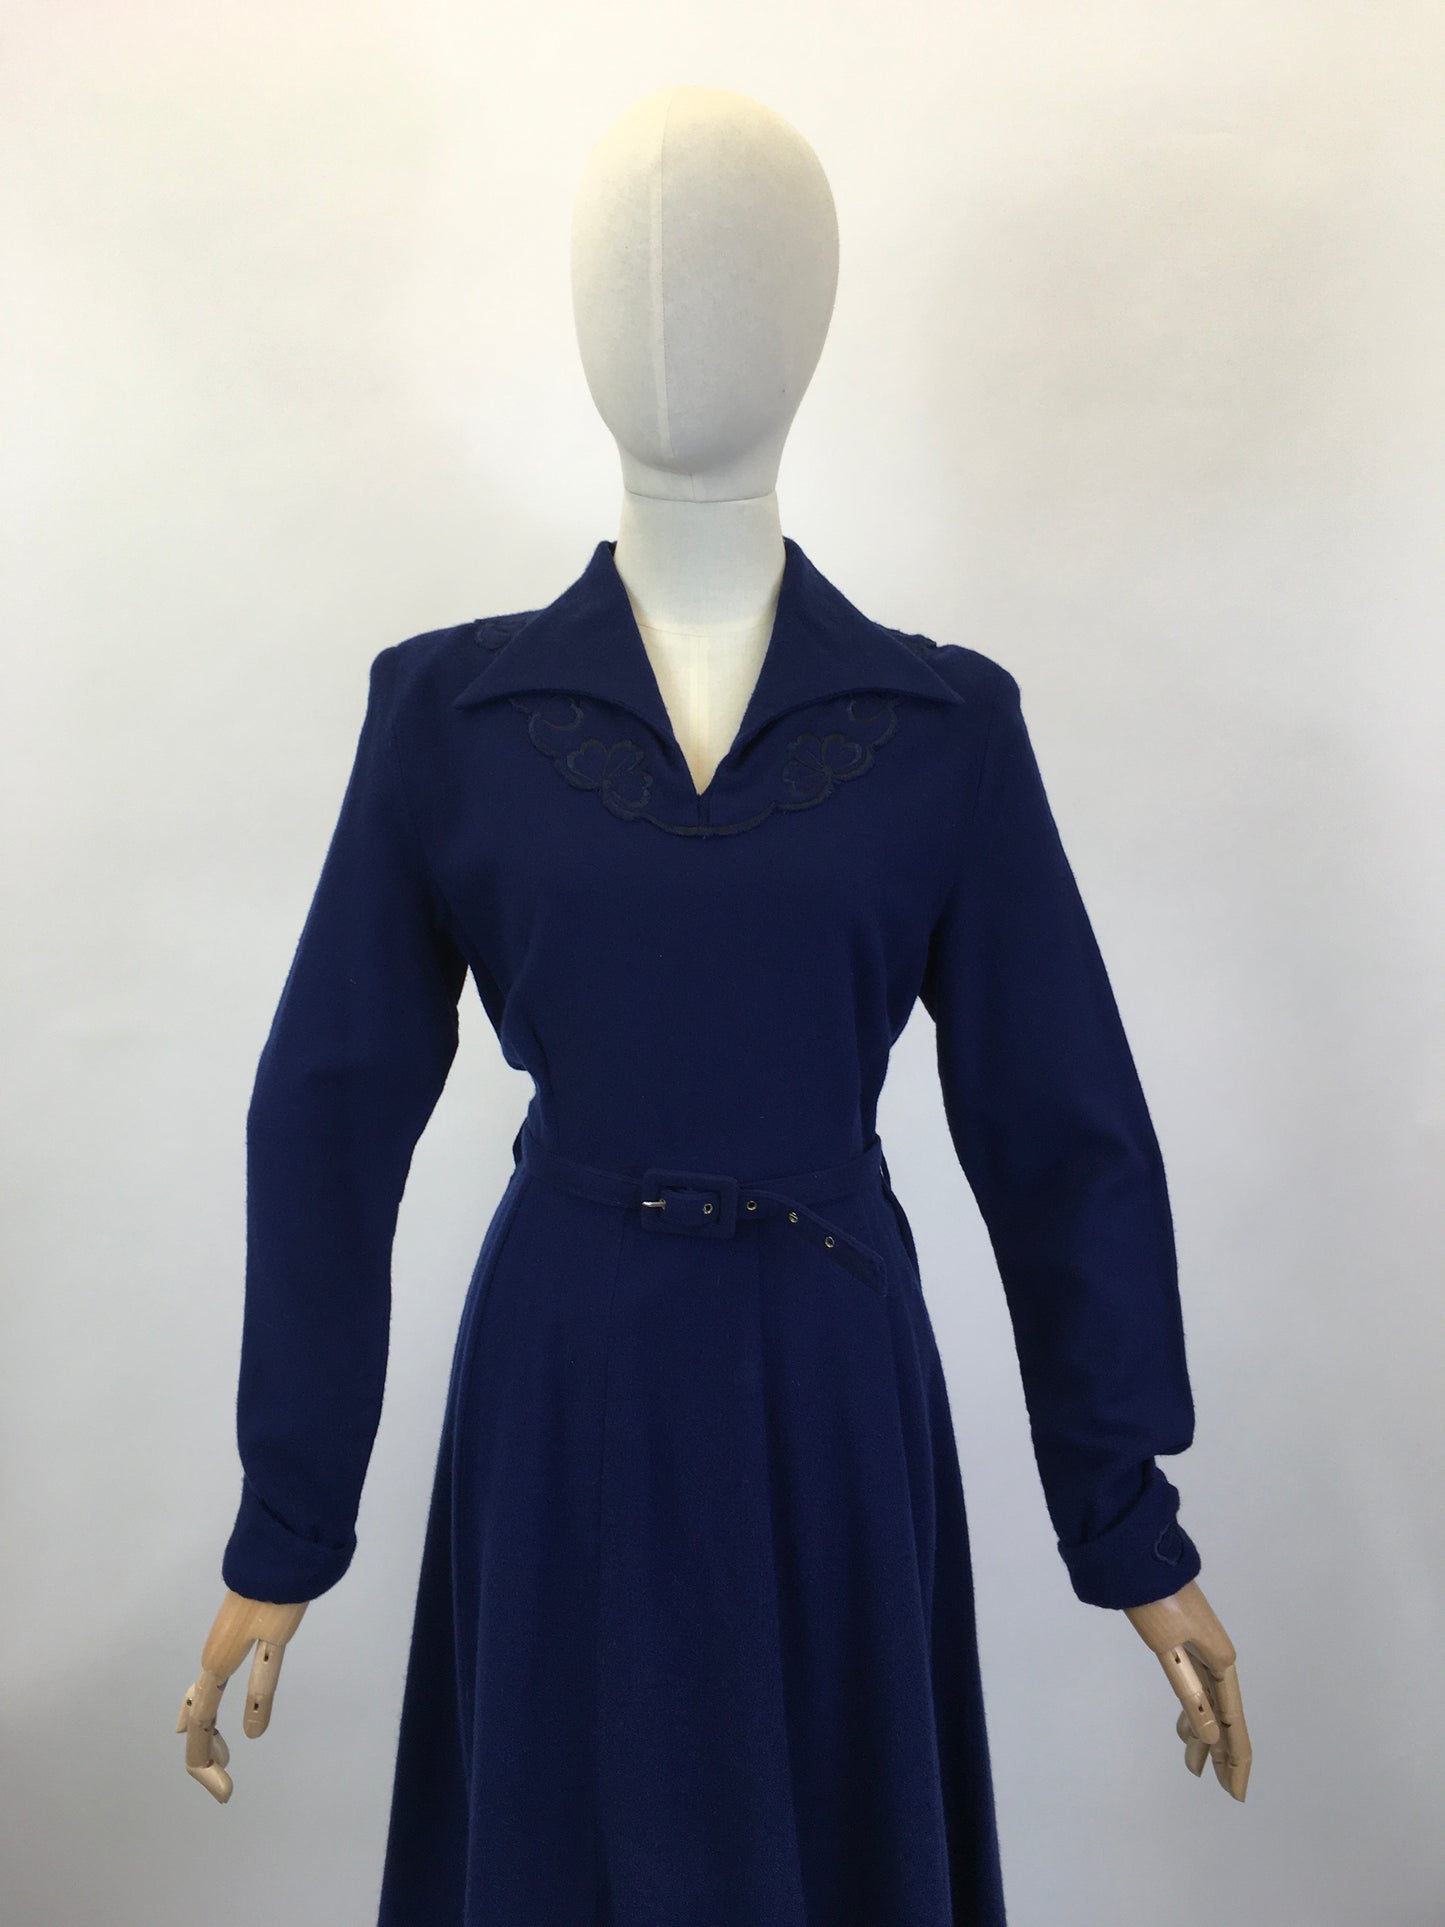 Original 1940's Sensational CC41 Utility Wool Dress - In A Royal Blue with Floral Embellishment